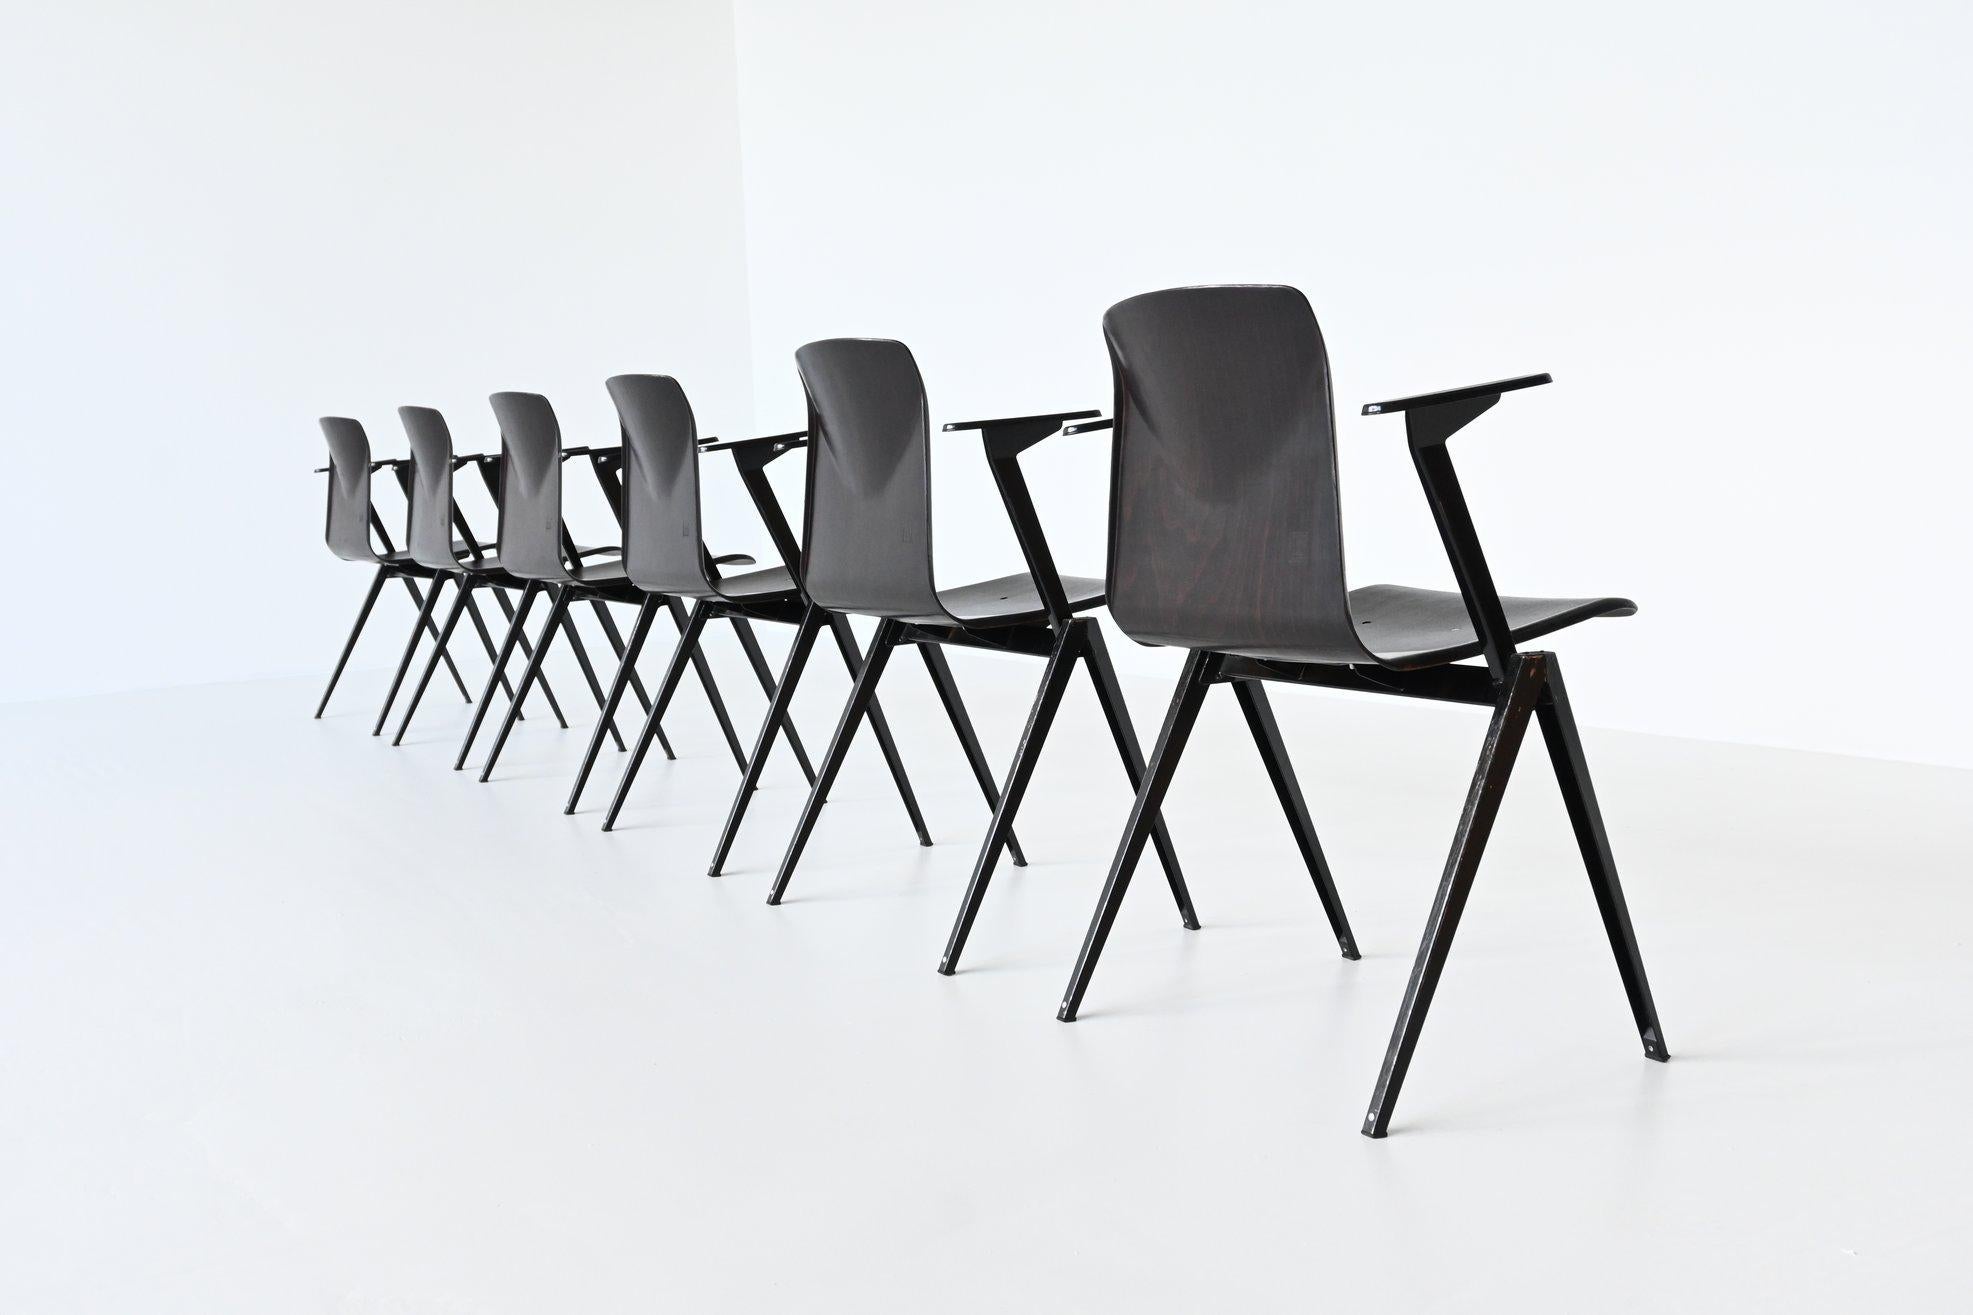 Large lot of 30 stacking chairs with armrests model S22 designed by Elmar Flototto and manufactured by Pagholz, Germany 1970. These chairs have black v-shaped metal frames and dark brown pressed wood seats. They have a nice patina from several years